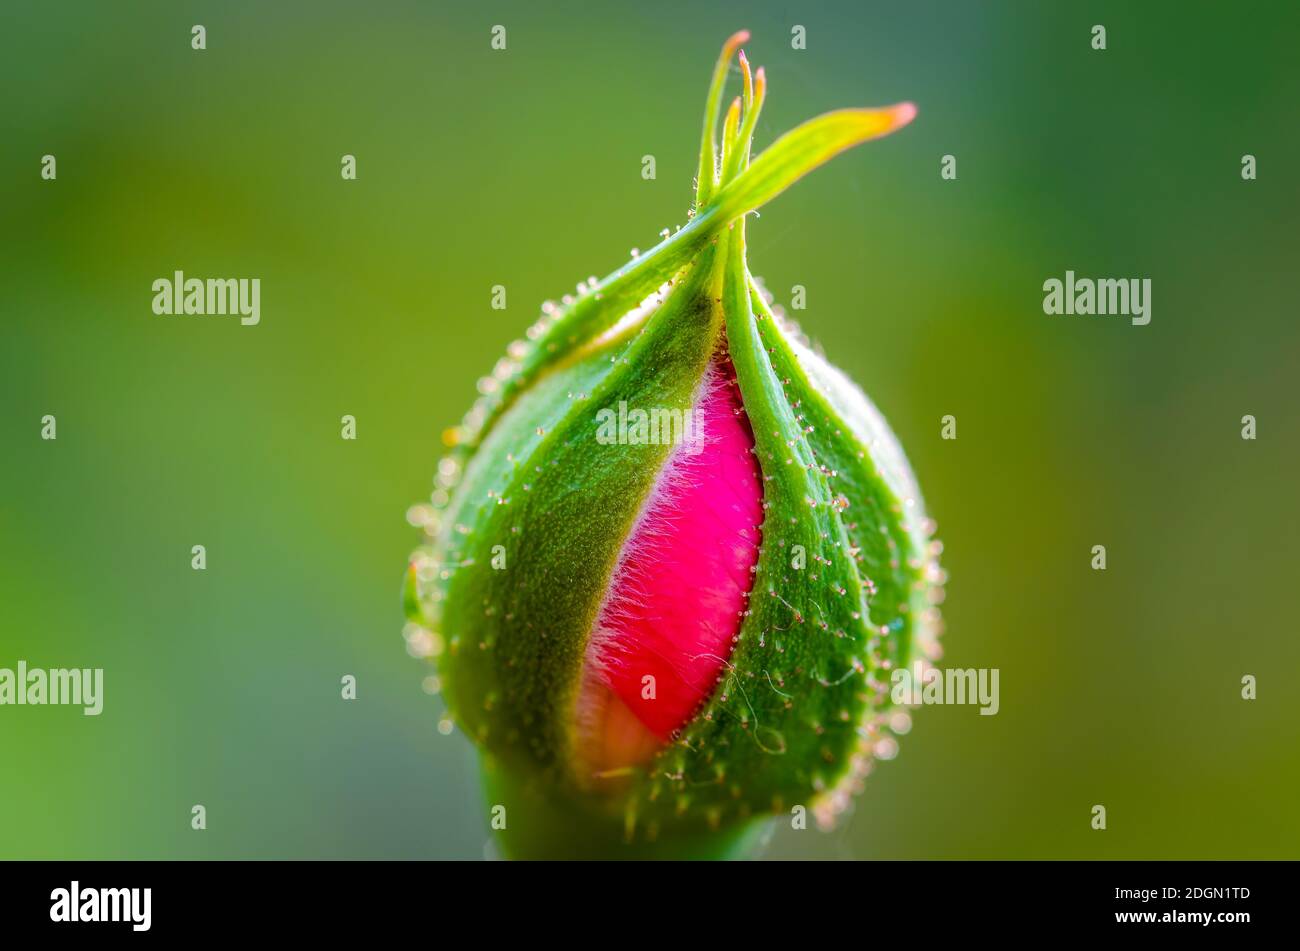 Rose bud ready to be blossomed on a green blurred background. Macro Shot. Stock Photo